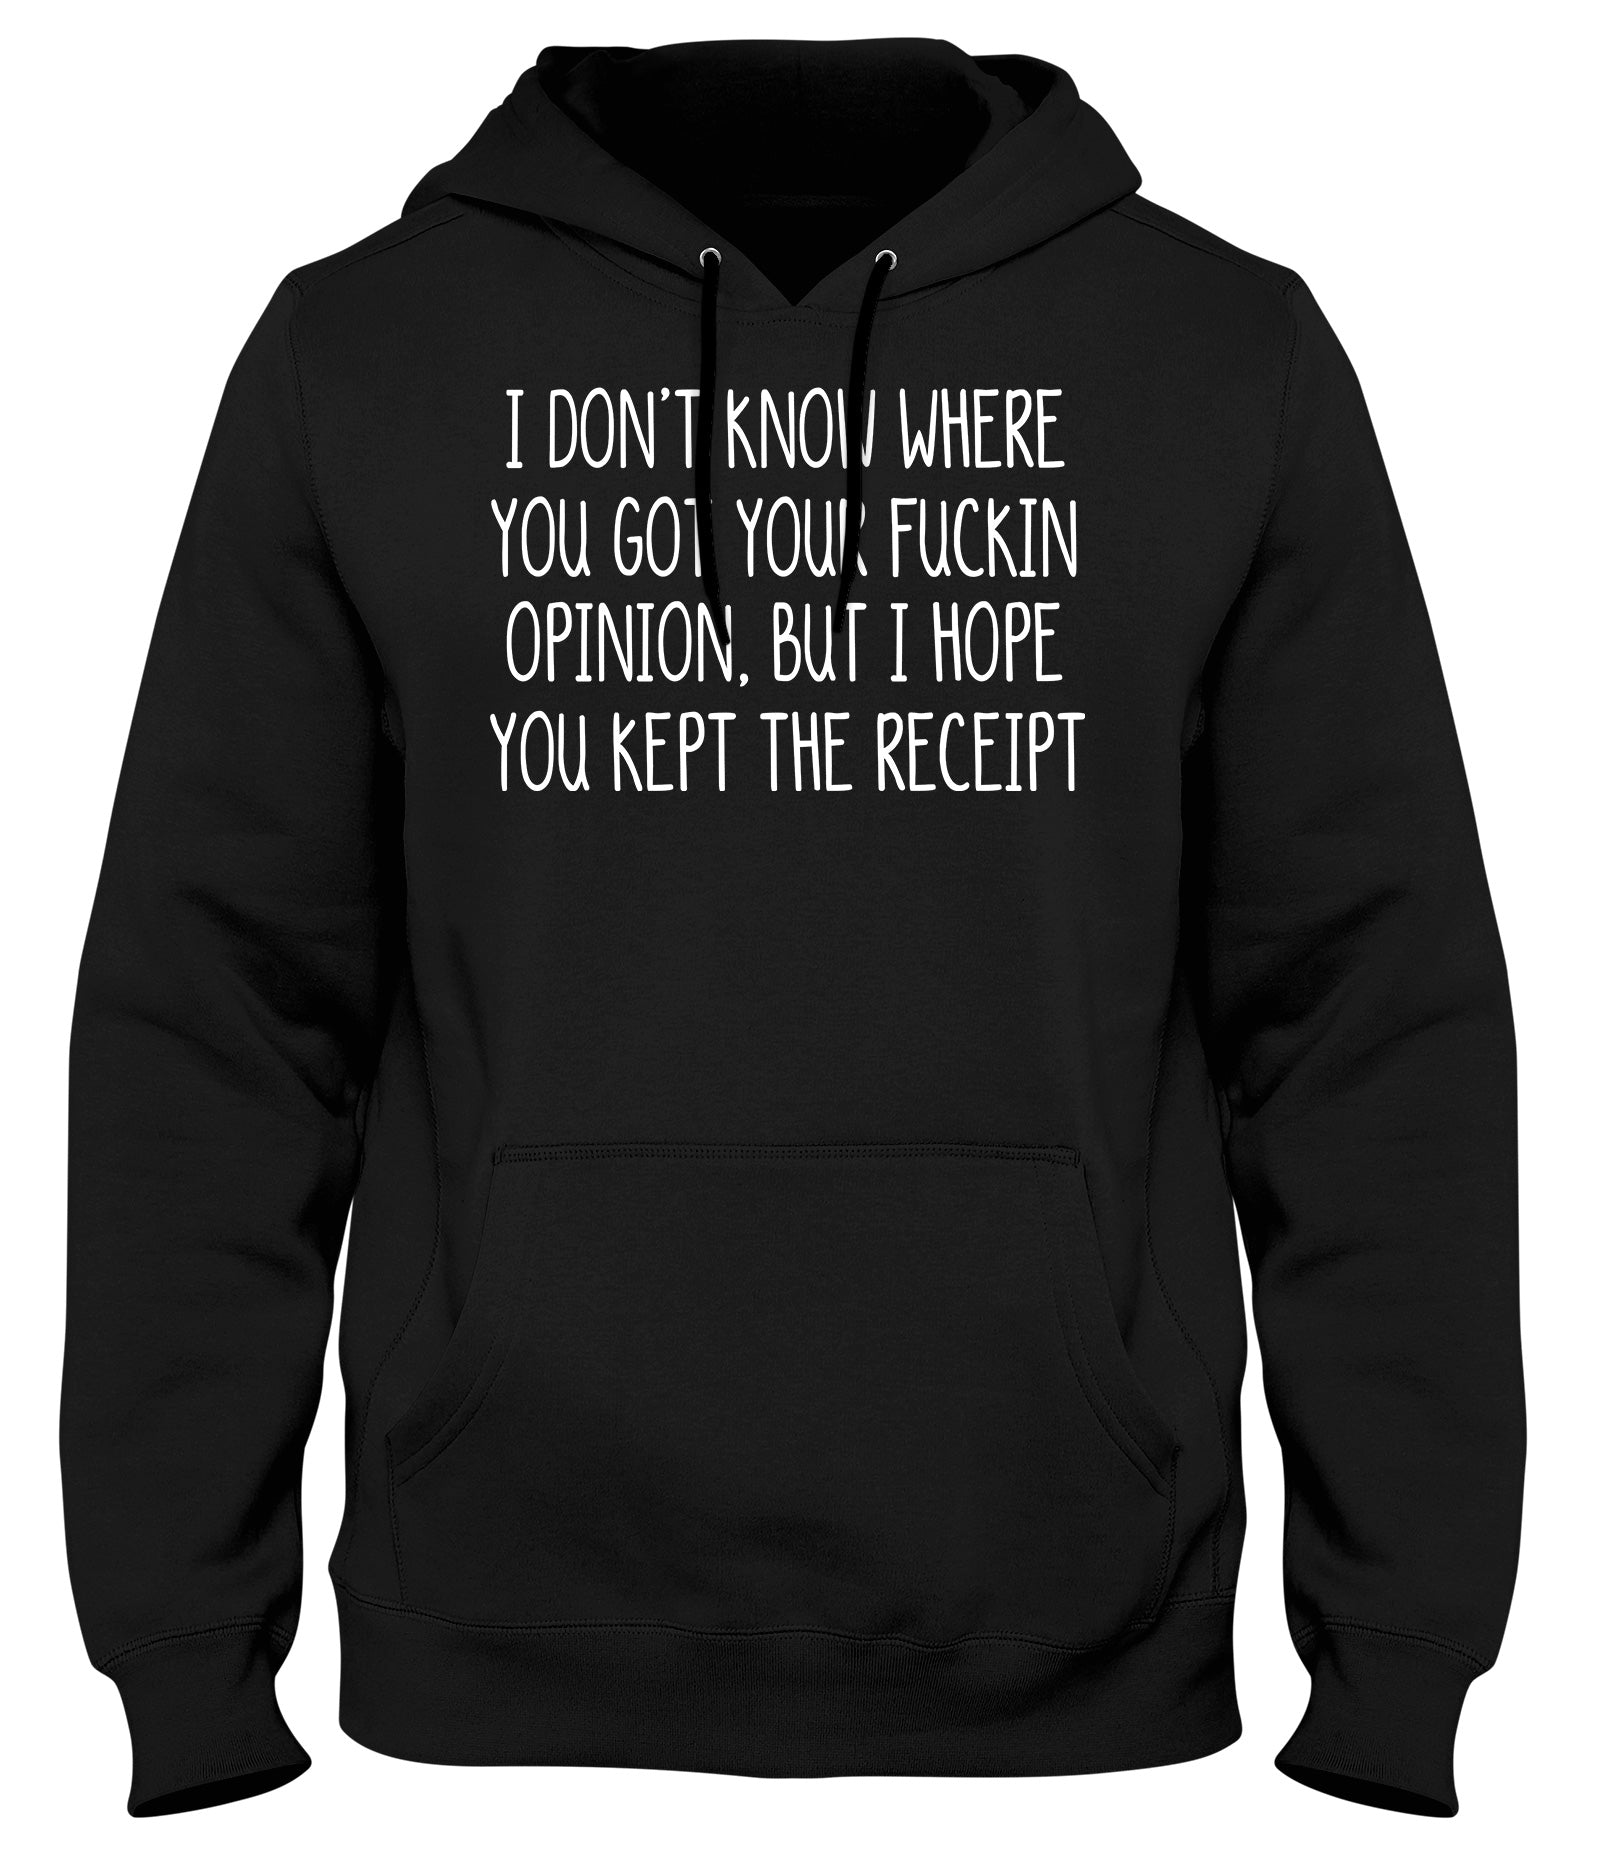 I DON'T KNOW WHERE YOU GOT YOUR OPINION BUT I HOPE YOU KEPT THE RECEIPT MENS WOMENS UNISEX FUNNY HOODIE